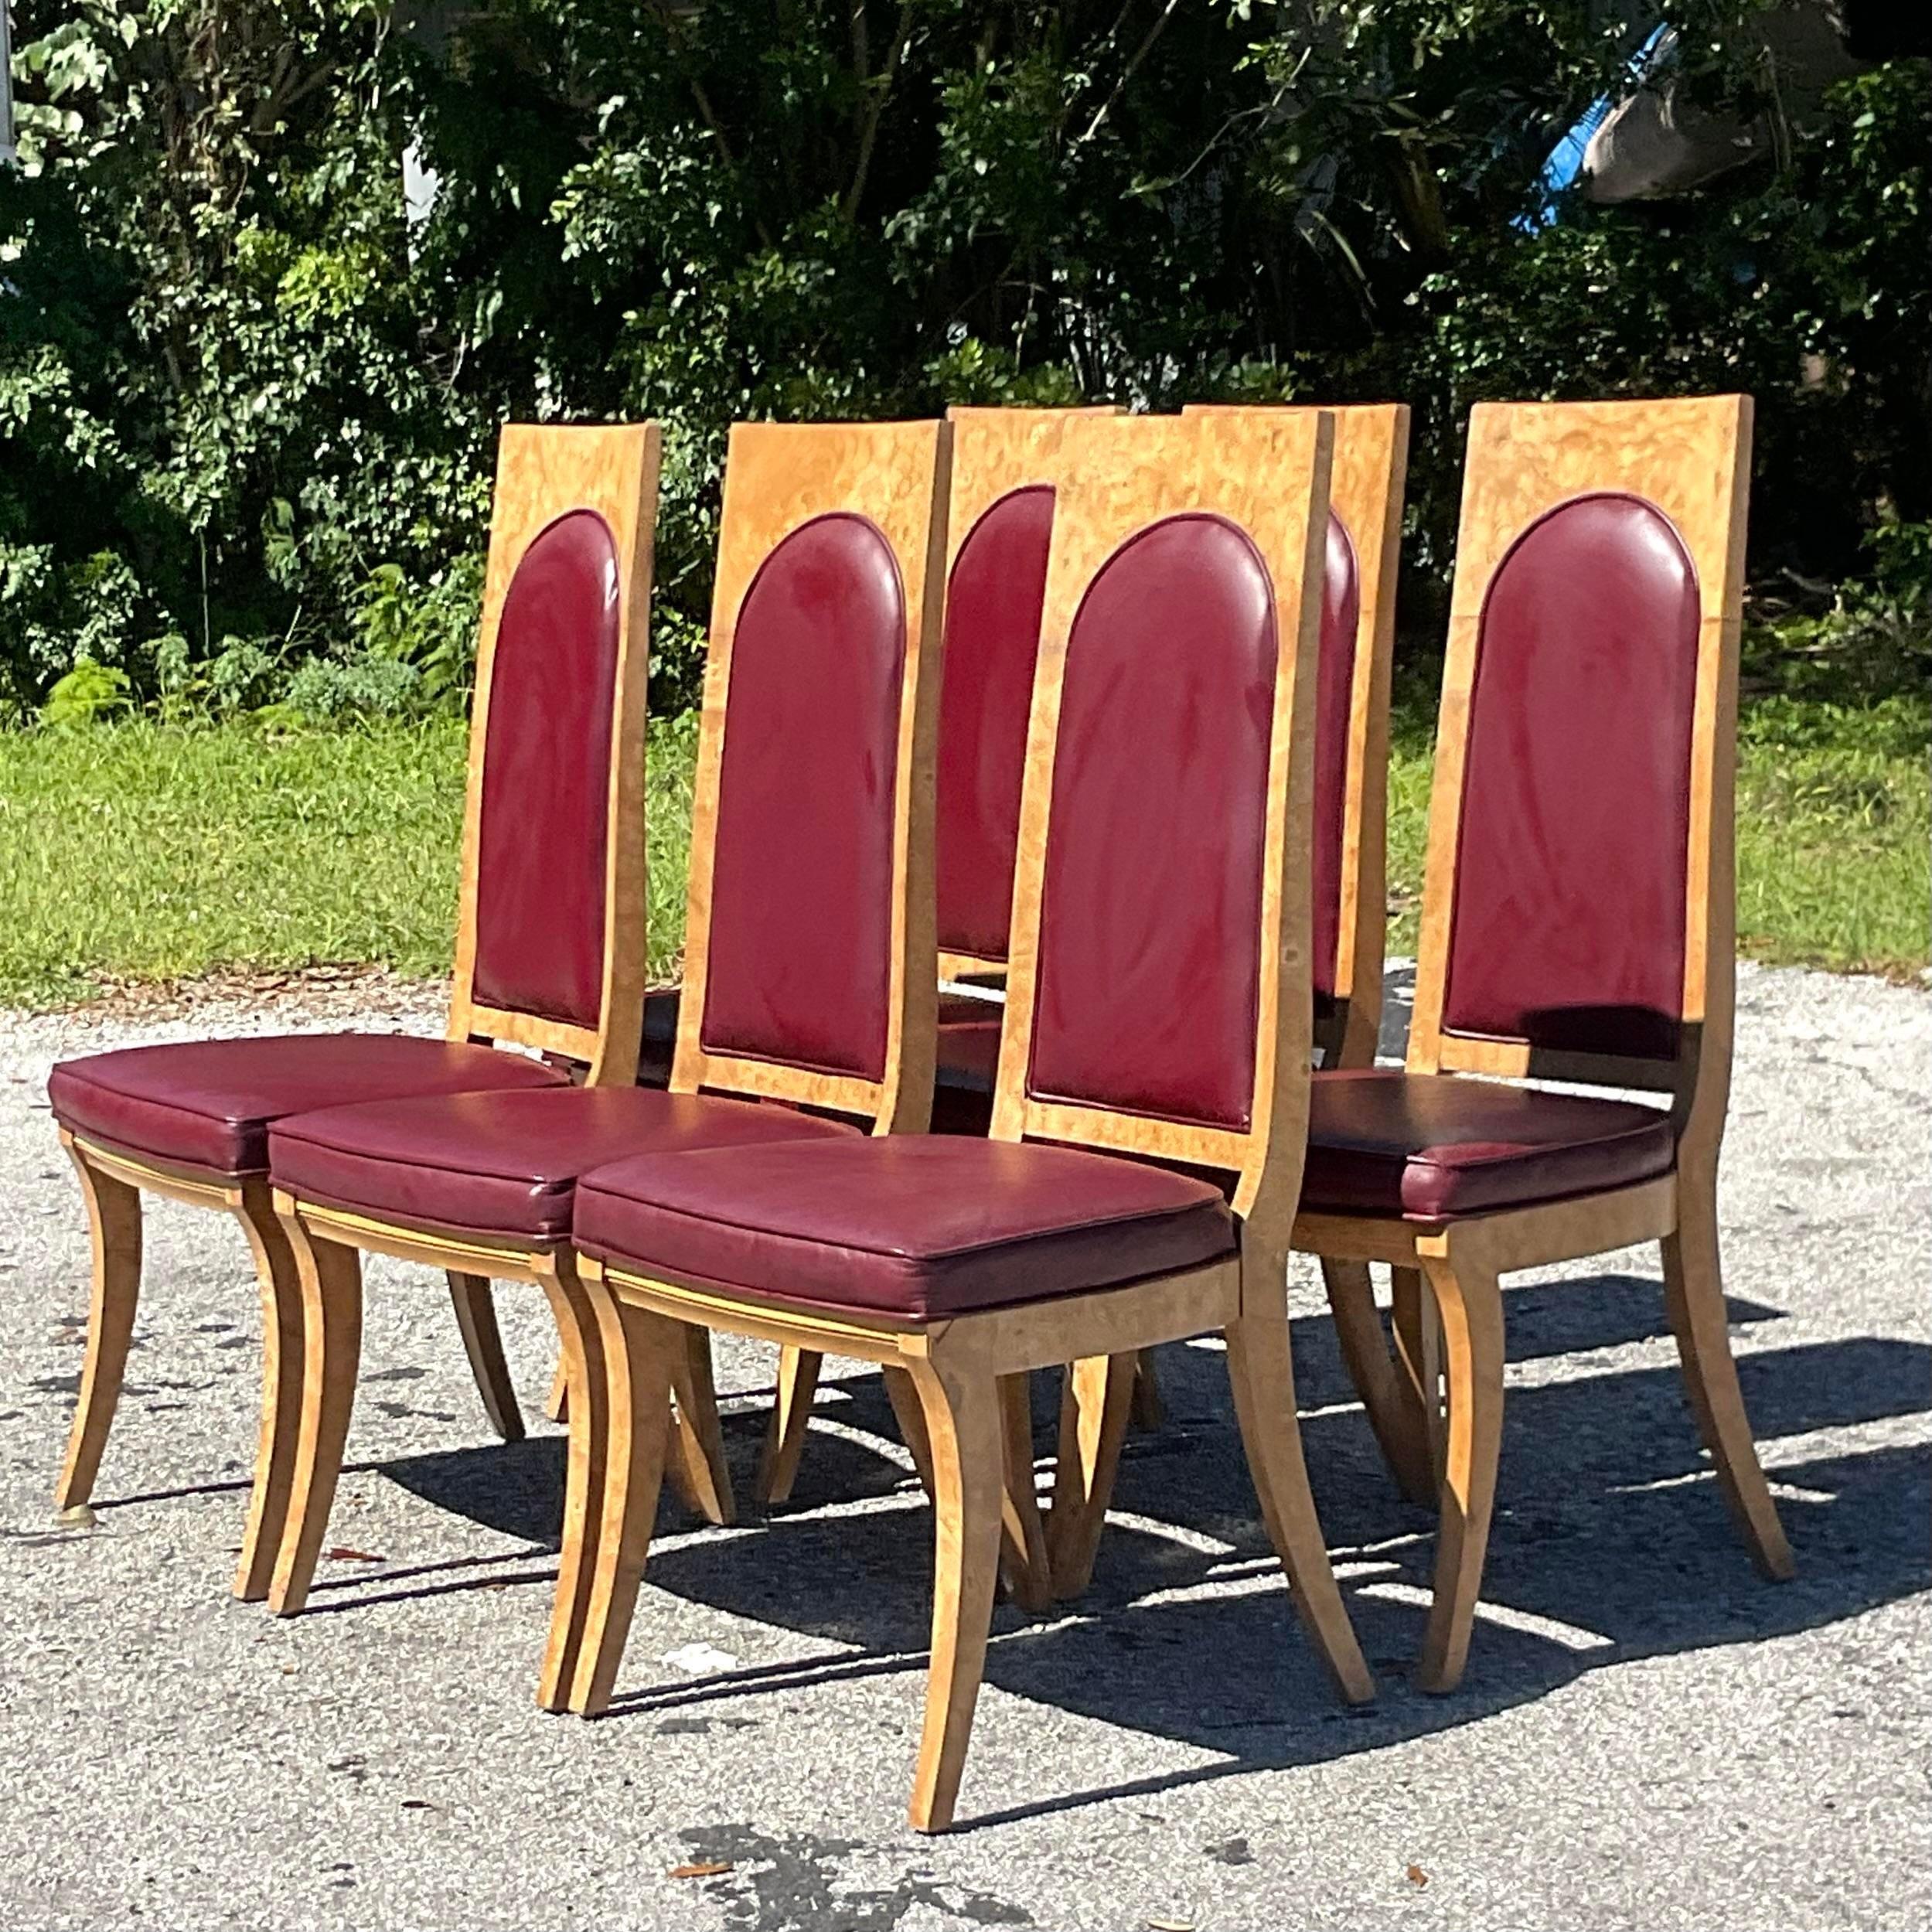 A fabulous set of sic vintage Boho dining chairs. Made by the iconic Mastercraft group. Unmarked. A chic saber leg and Aboyna Burl wood frame. Inset faux leather upholstery. Acquired from a Palm Beach estate.